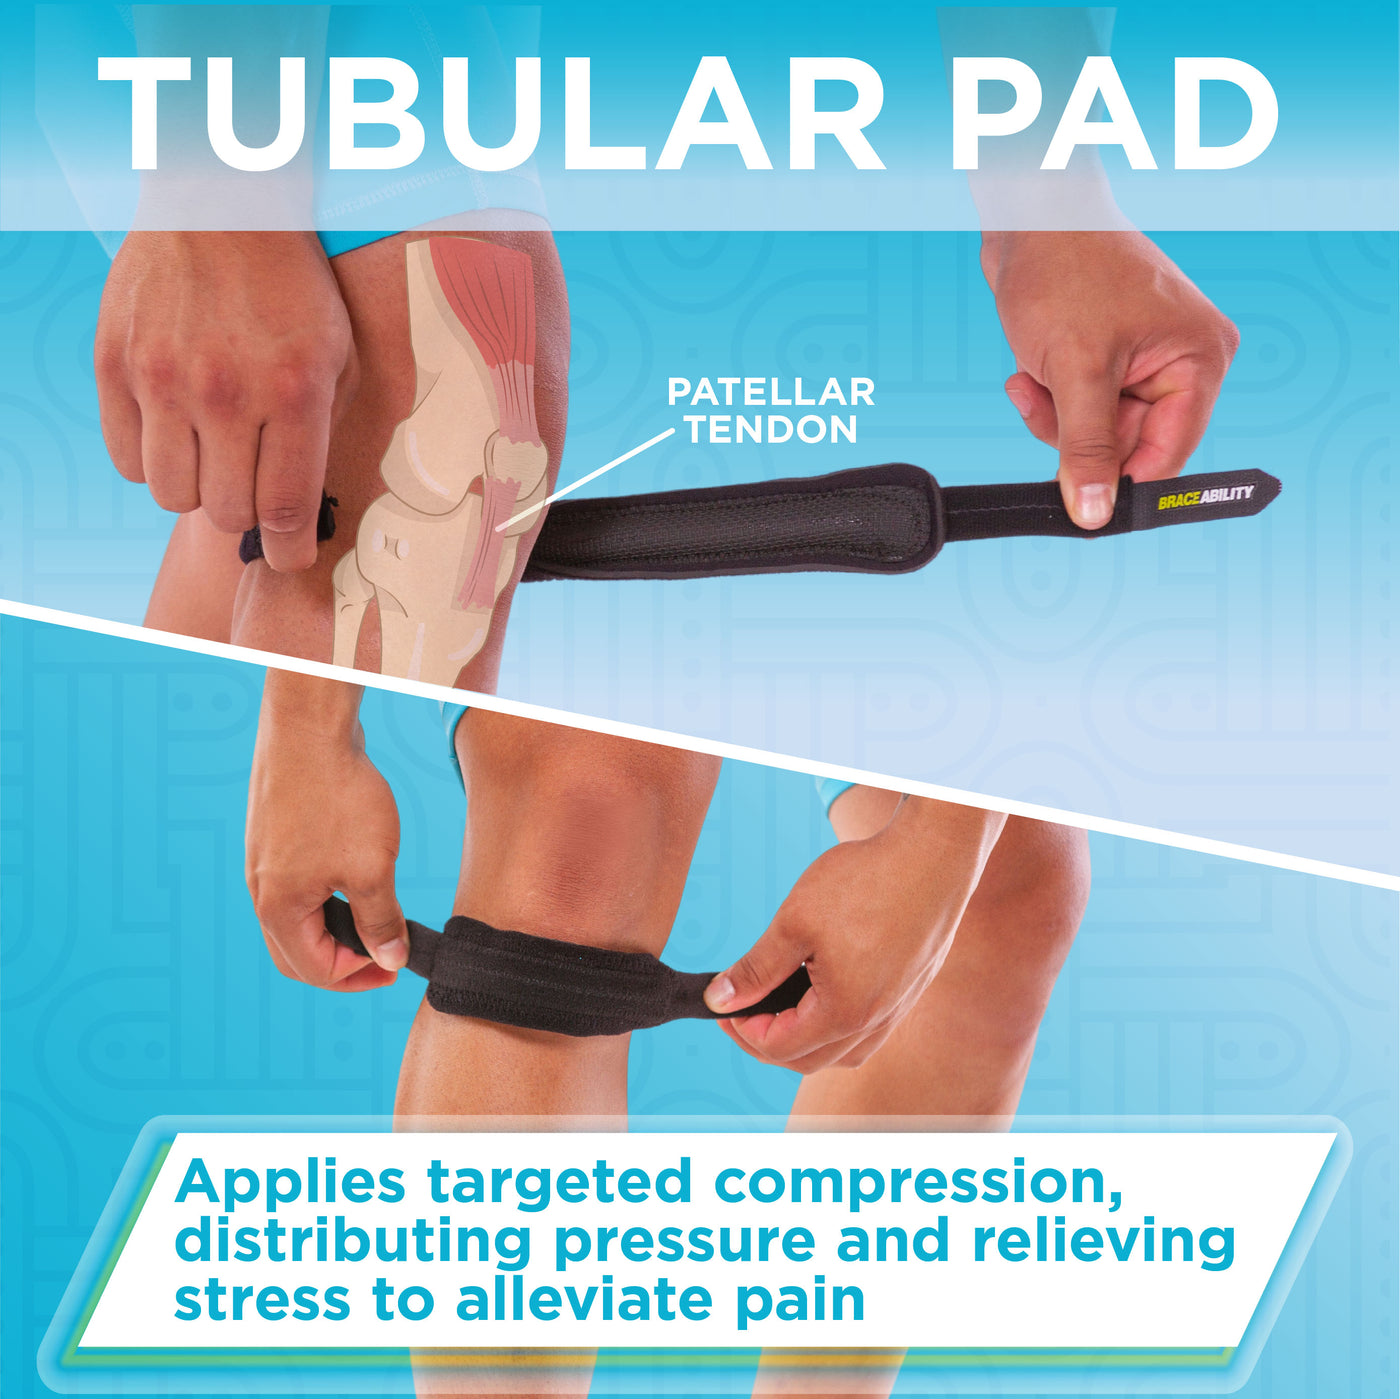 Tubular pad on the osgood-schlatter knee band applies targeted compression to the knee, distributing pressure and relieving stress to alleviate pain